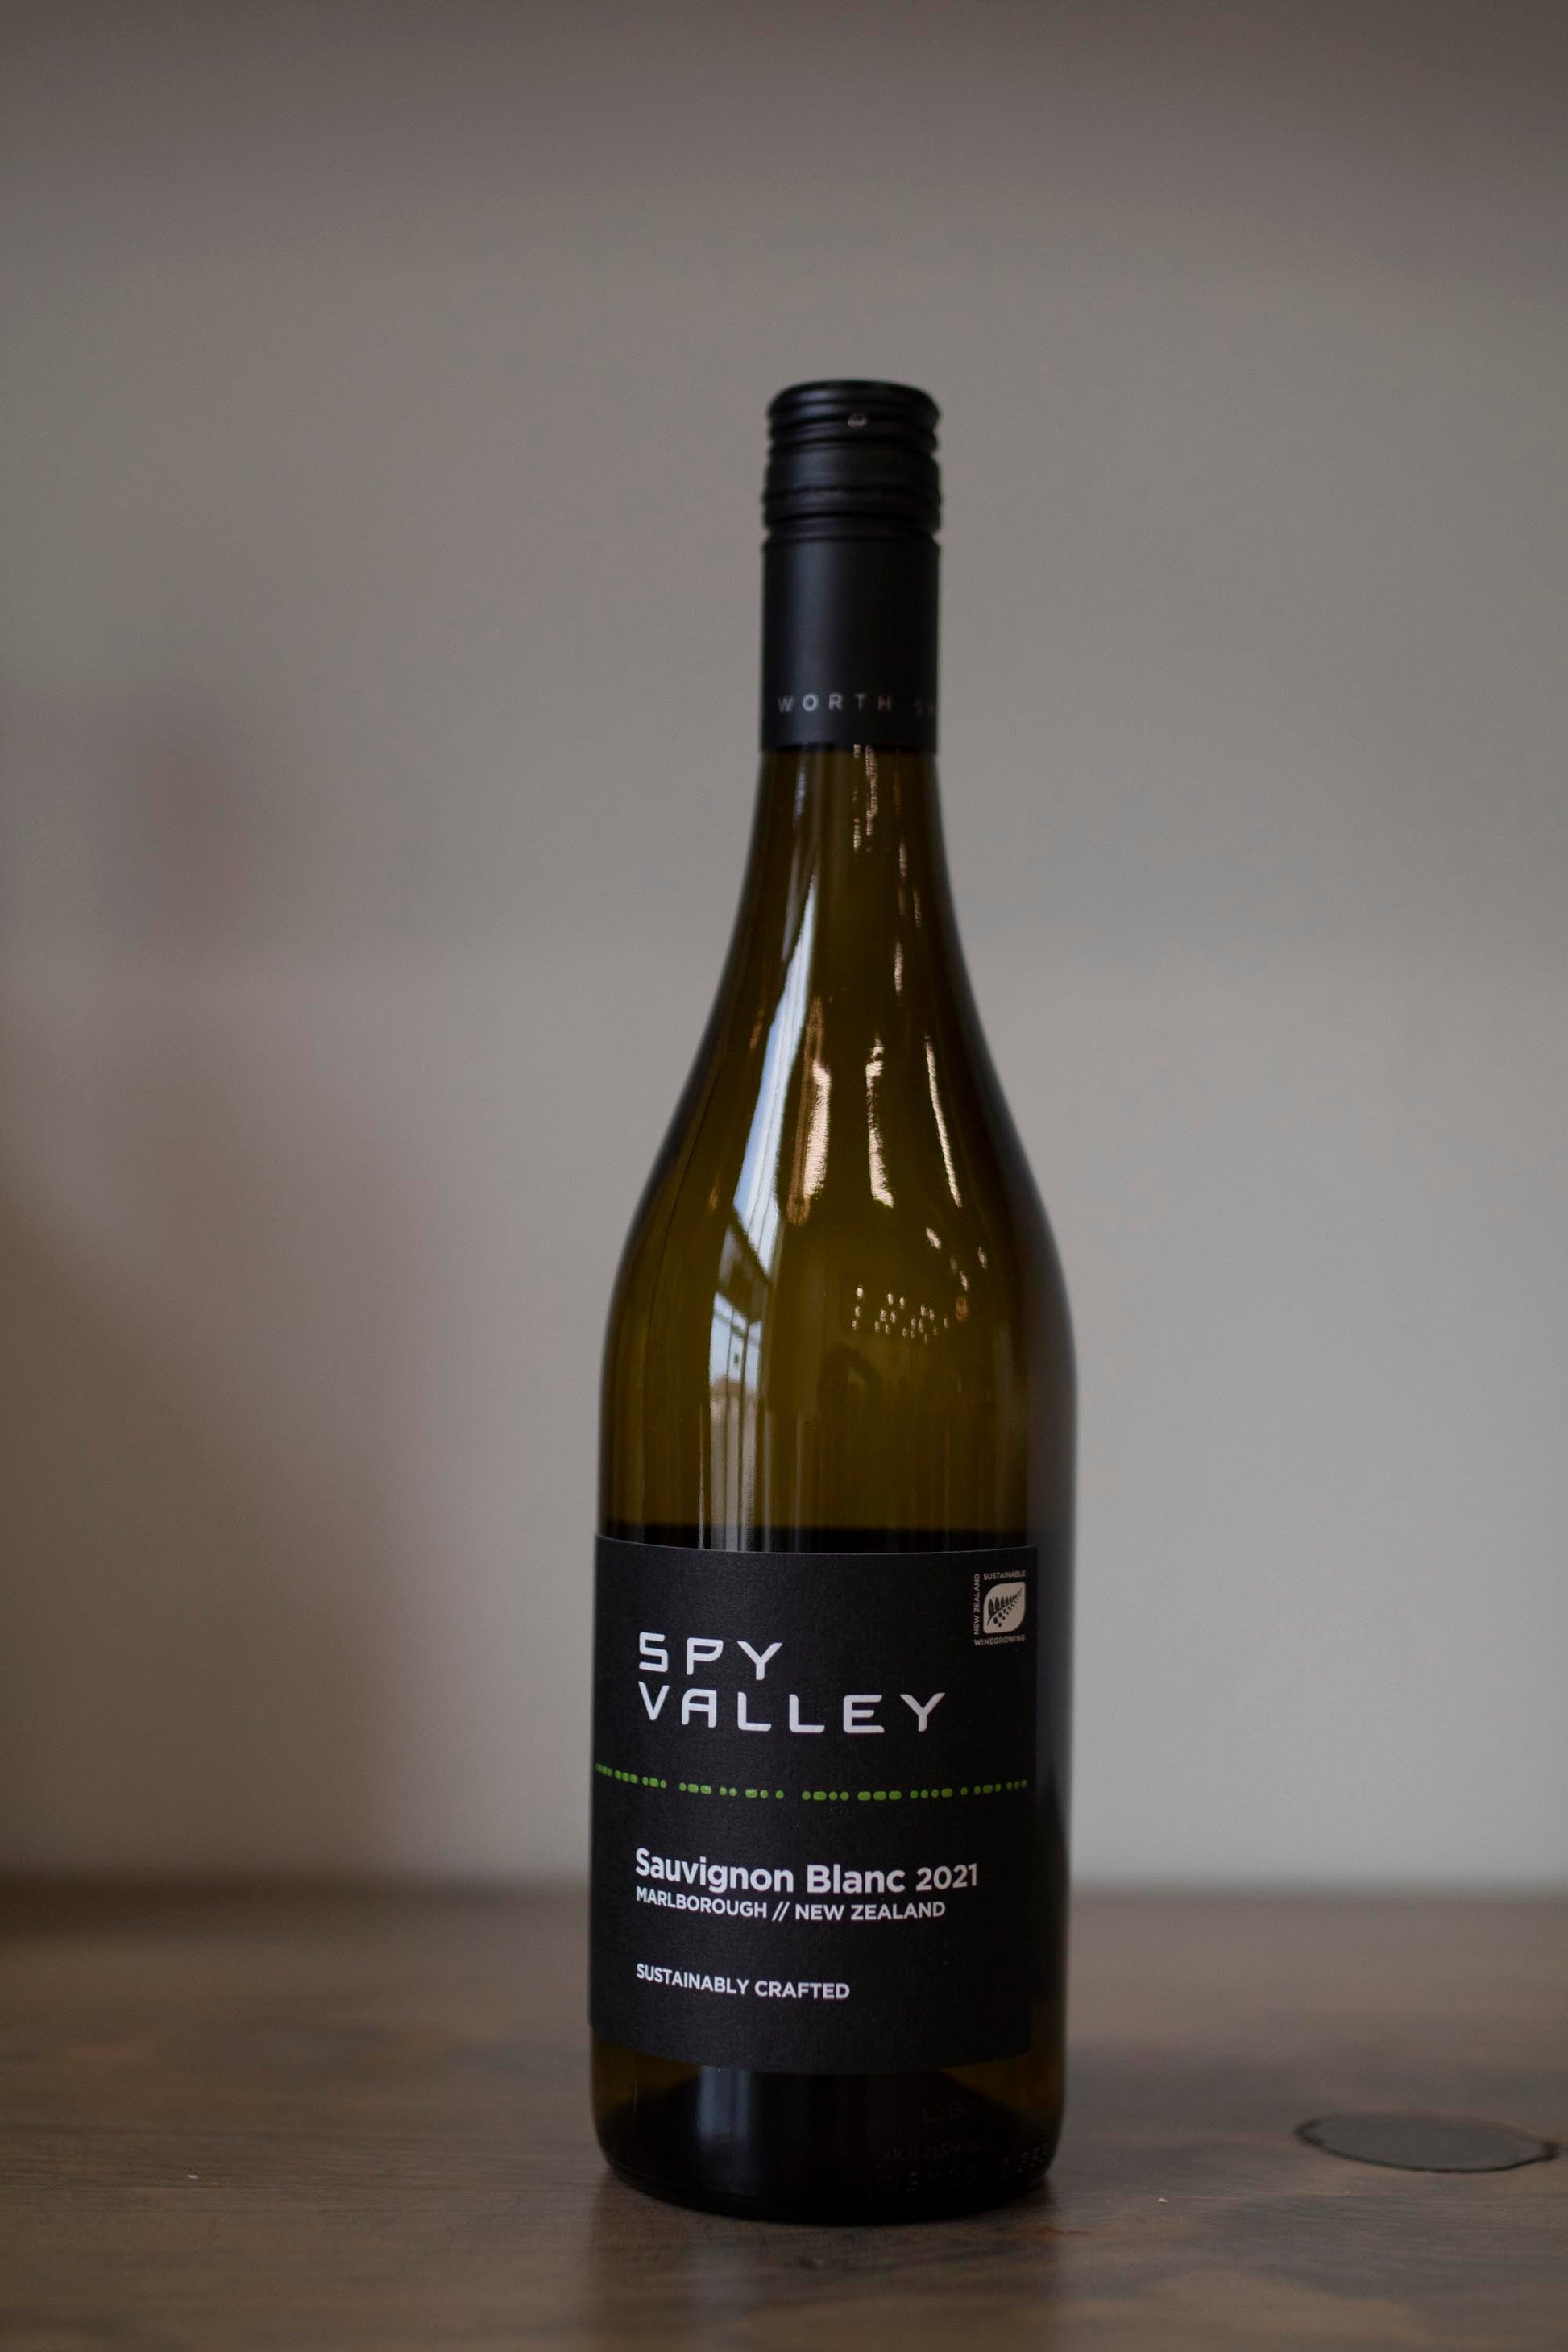 Bottle of Spy valley sauv blanc found at Vine & Board in 3809 NW 166th St Suite 1, Edmond, OK 73012